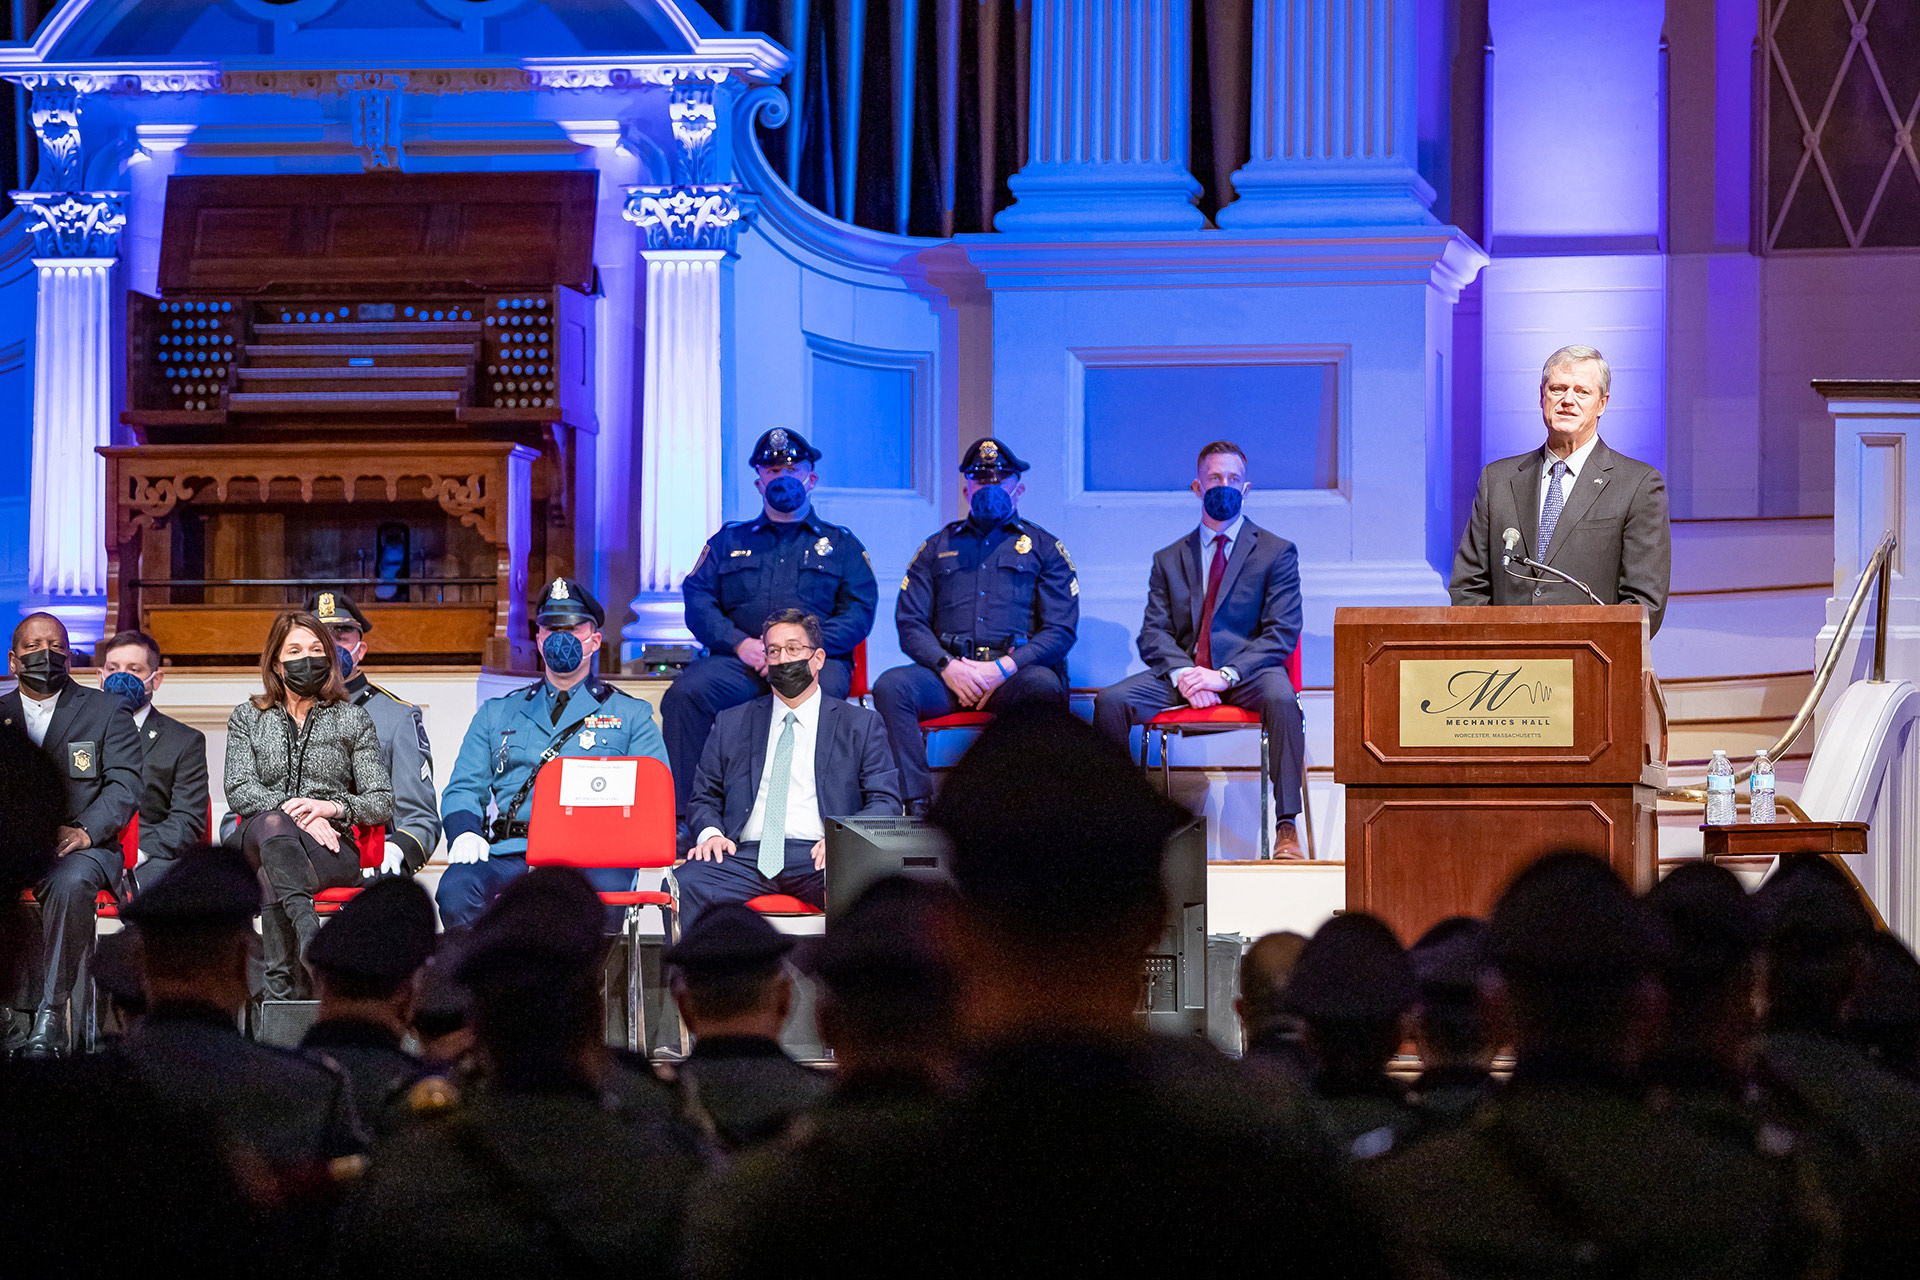 massachusetts-police-officers-honored-for-bravery-at-trooper-george-hanna-memorial-awards-1